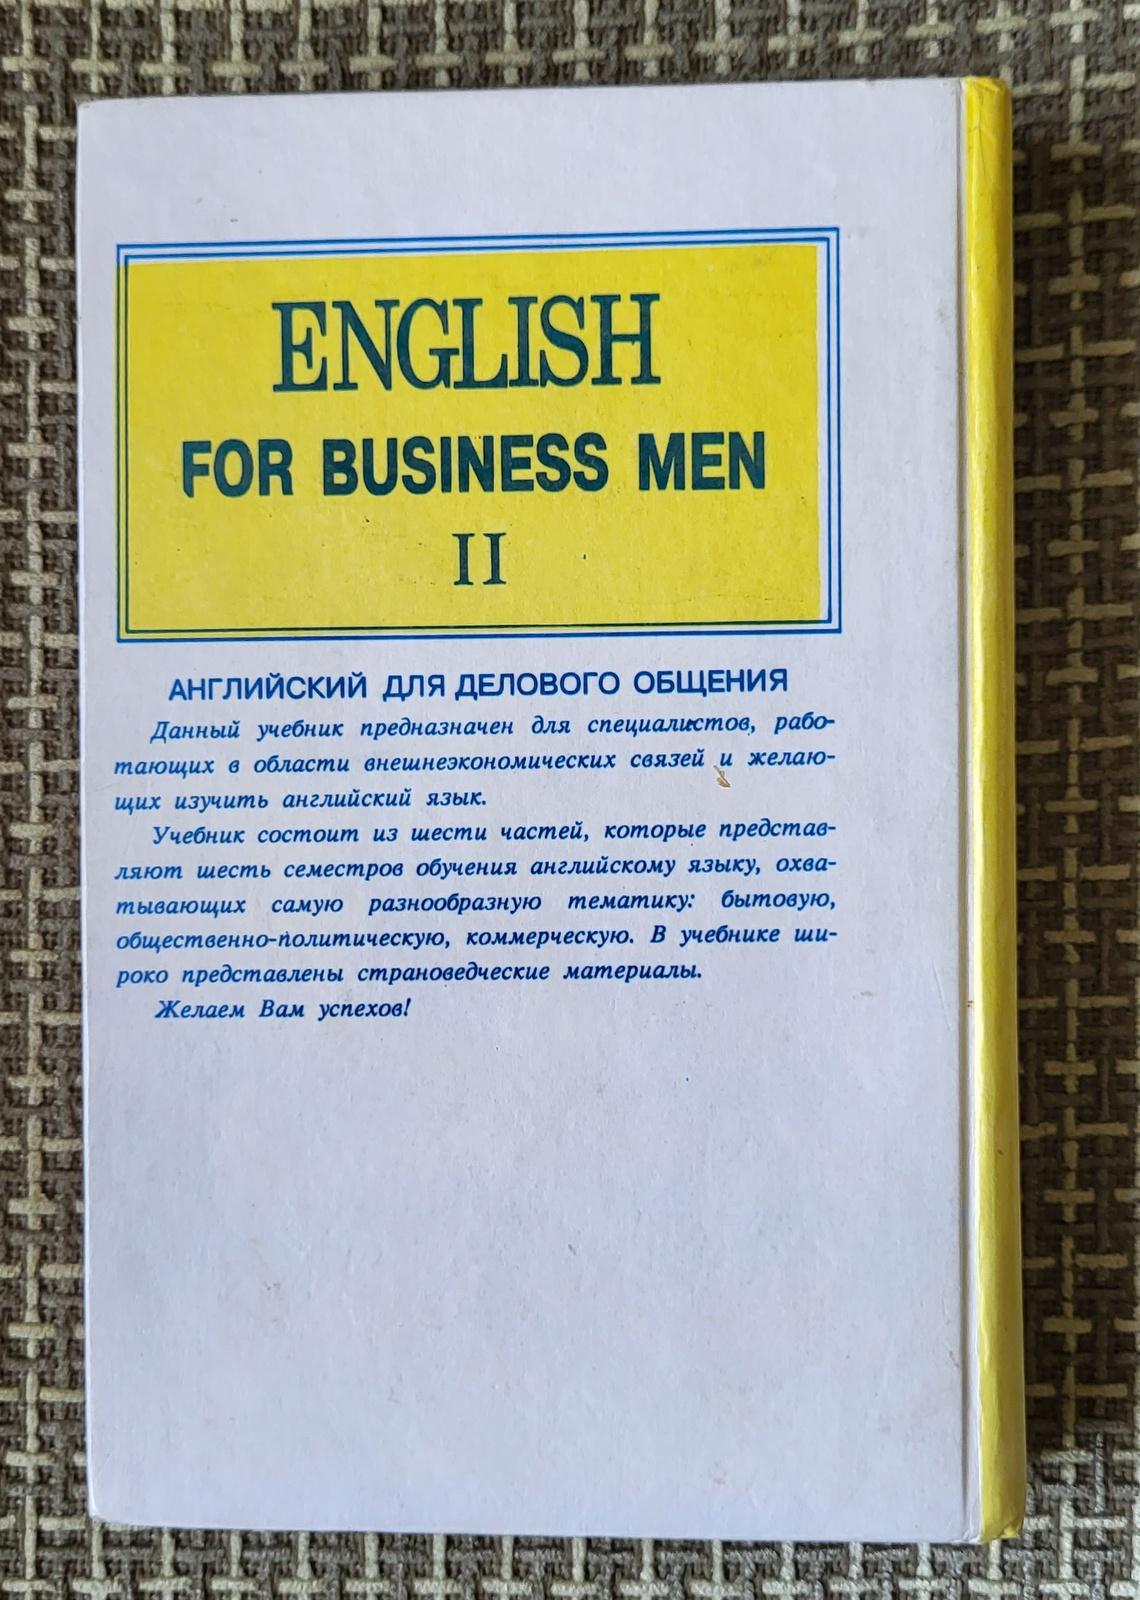 Unlock the world of international business communication with this vintage study book titled 'For Business Men' Part 2. Designed as a comprehensive guide to Business English, this vintage book was published in Tashkent in 1996, specifically tailored